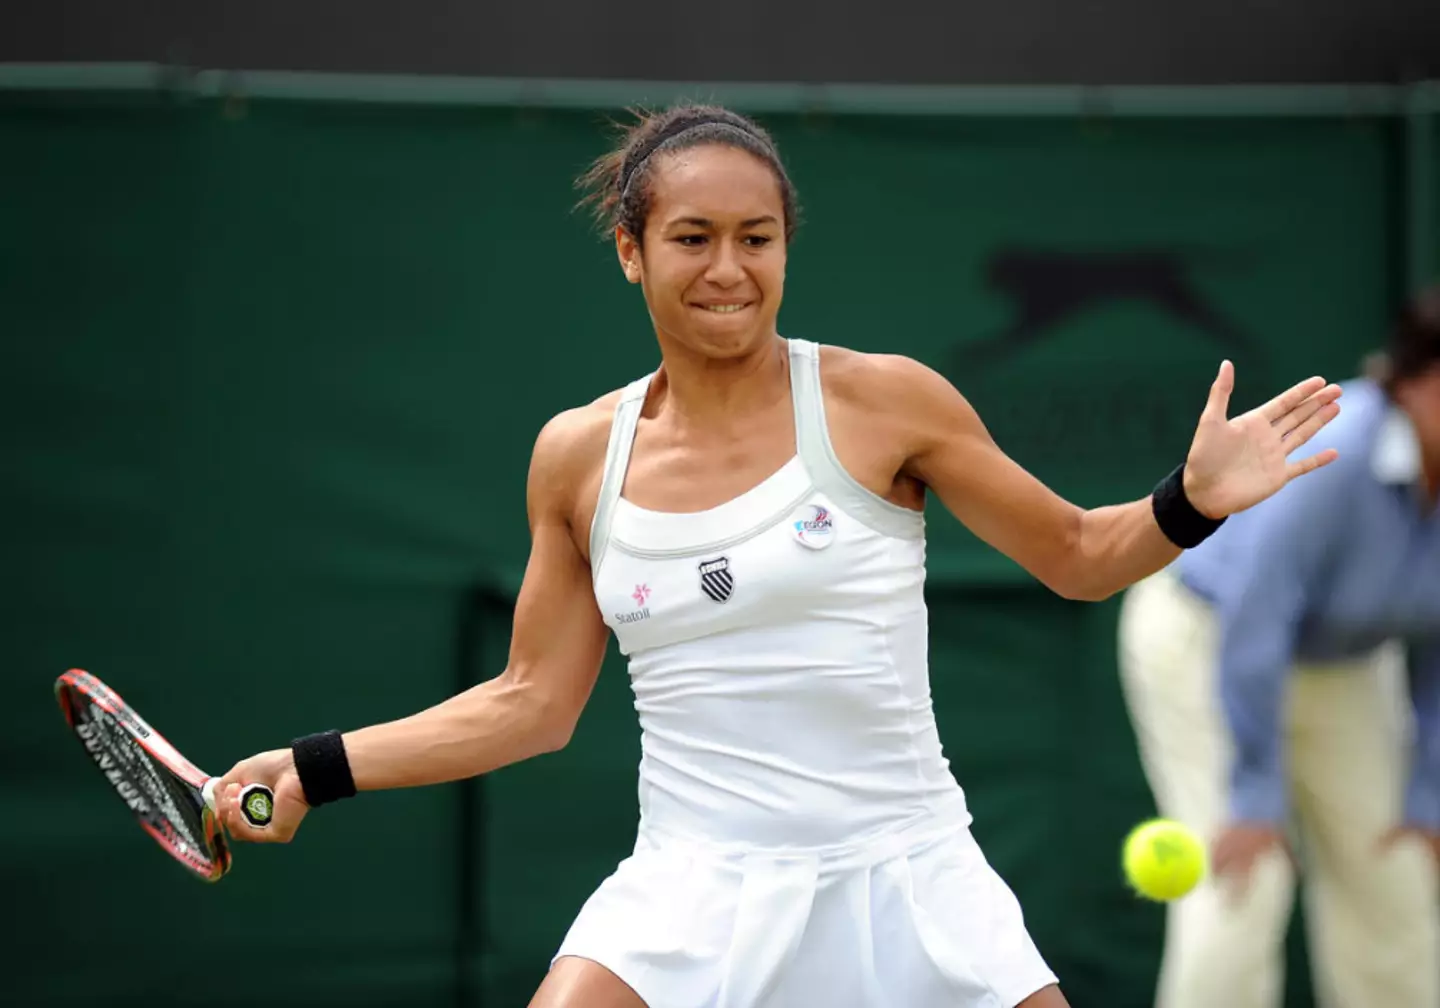 Heather Watson is one of those pleased to see the rule change.